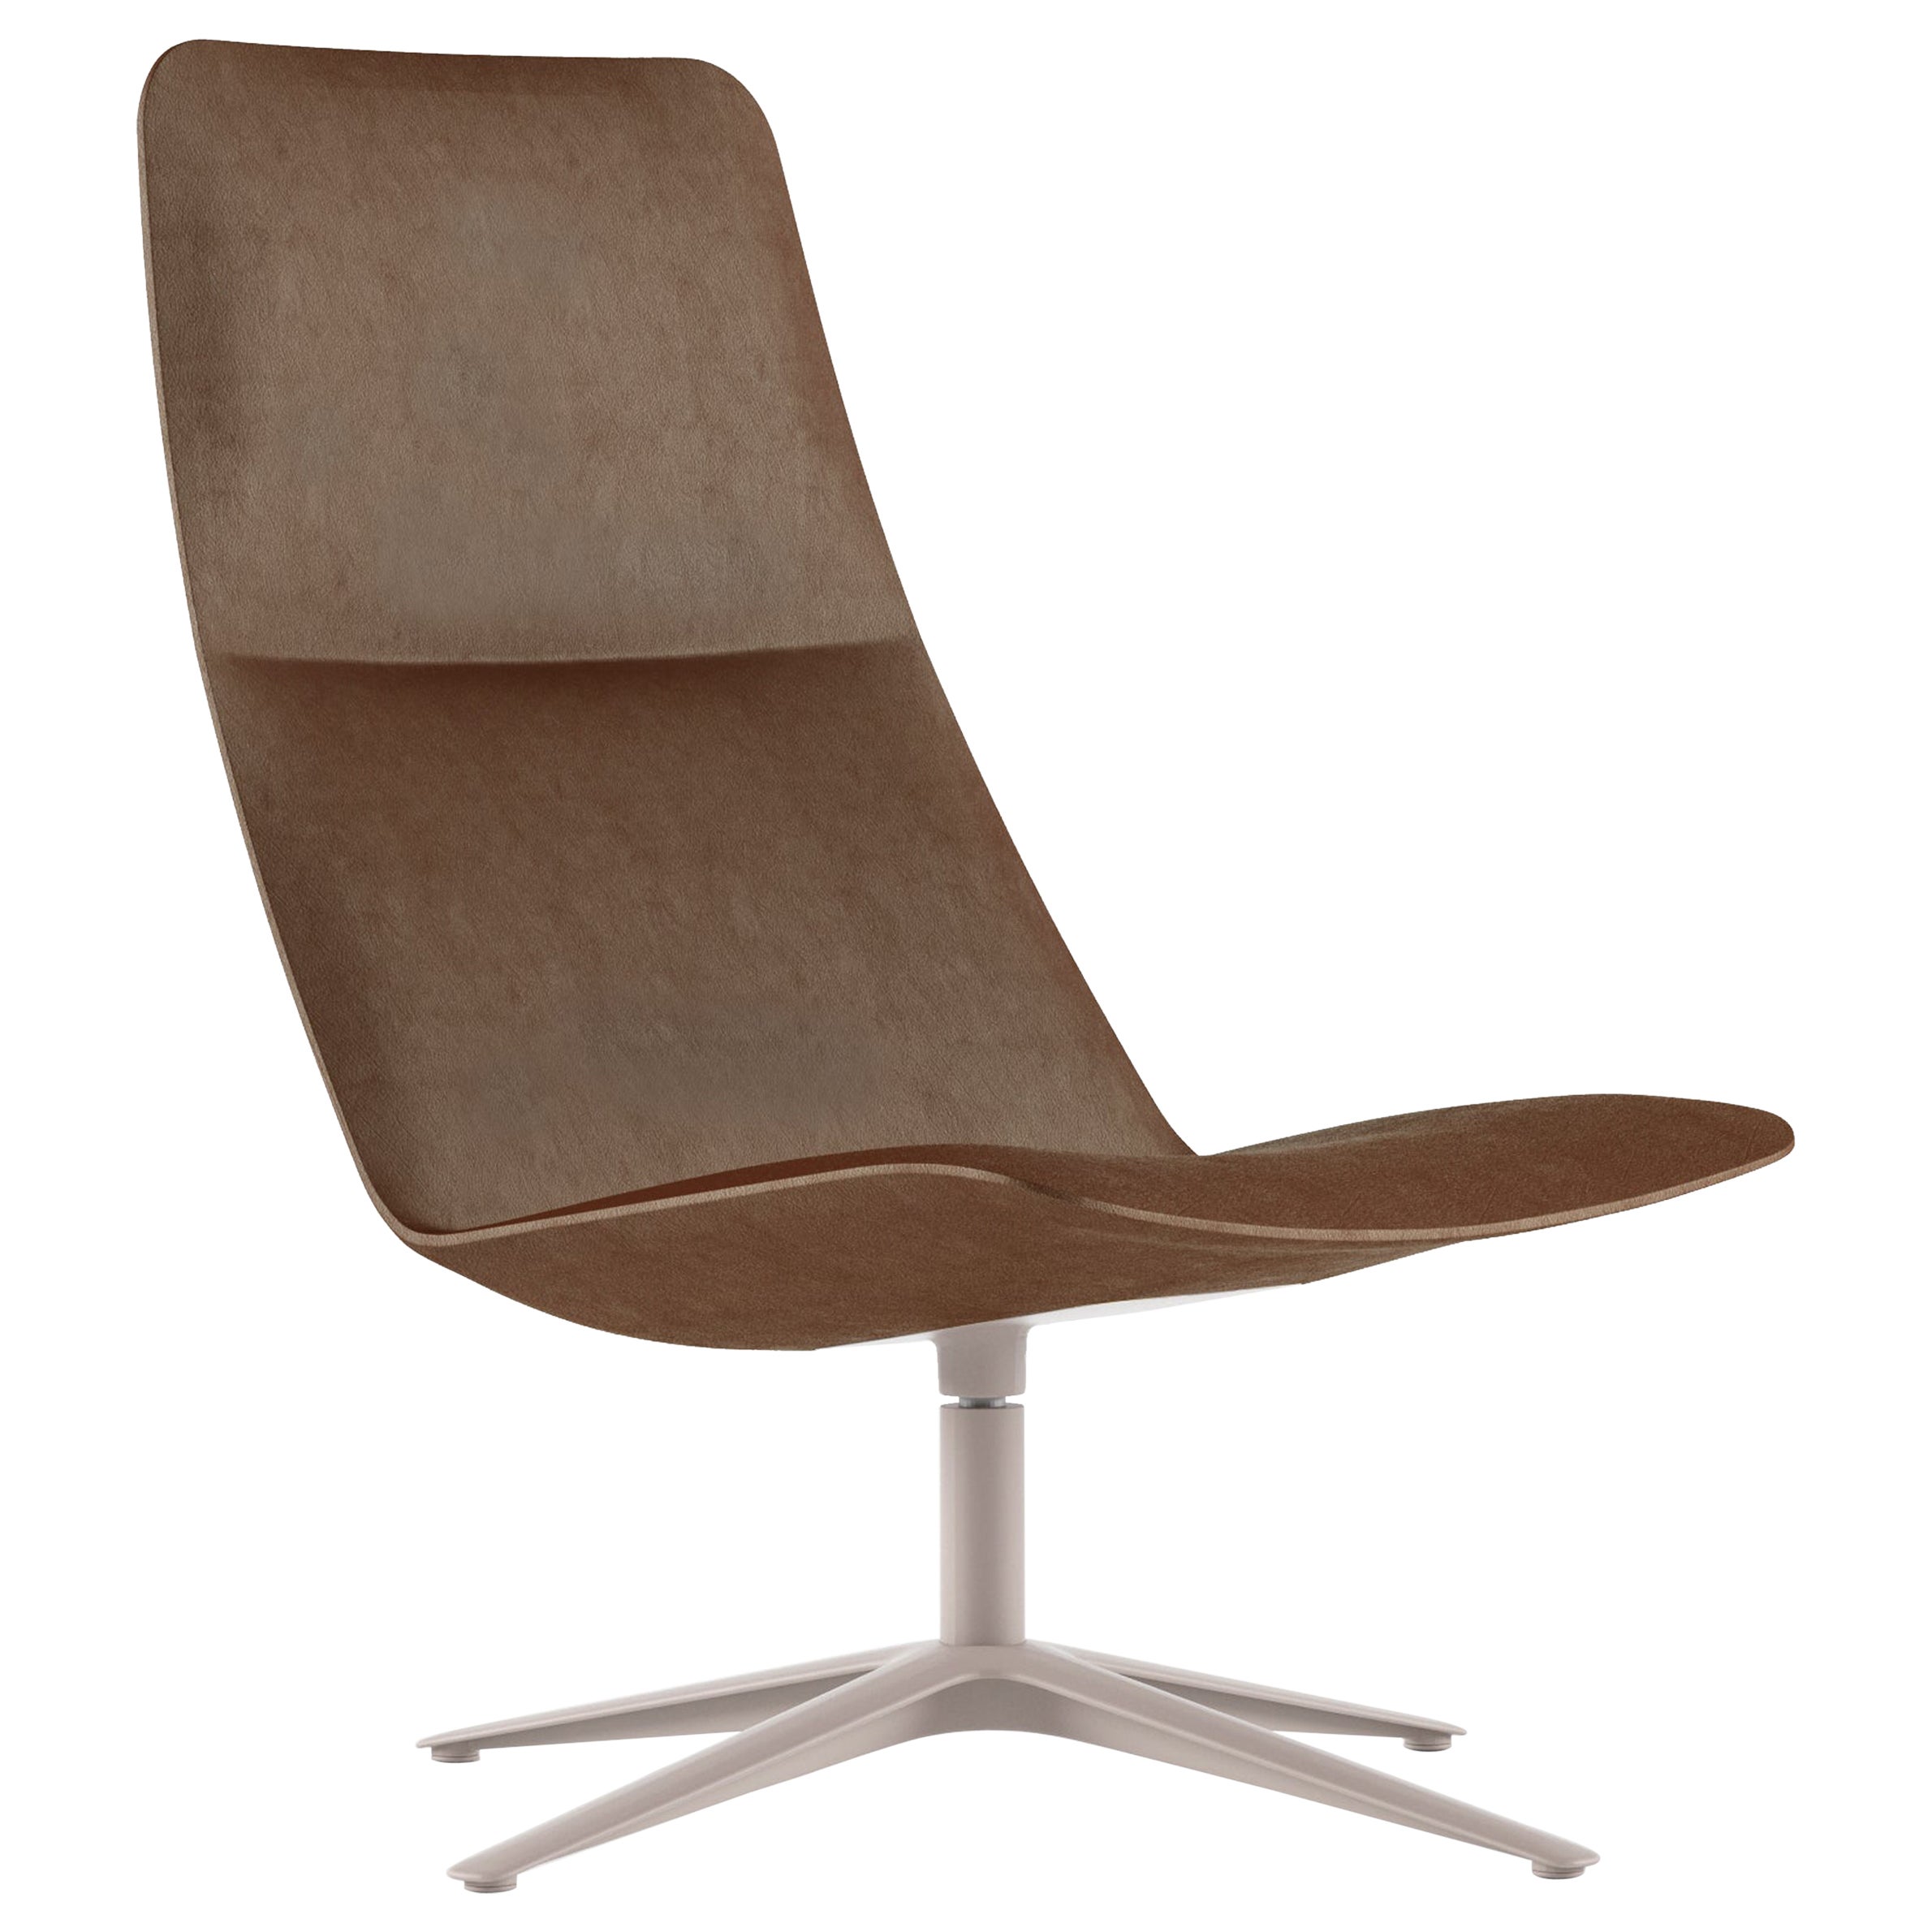 Alias 817 Slim Lounge High Chair in Brown Leather Seat with Sand Lacquered Frame